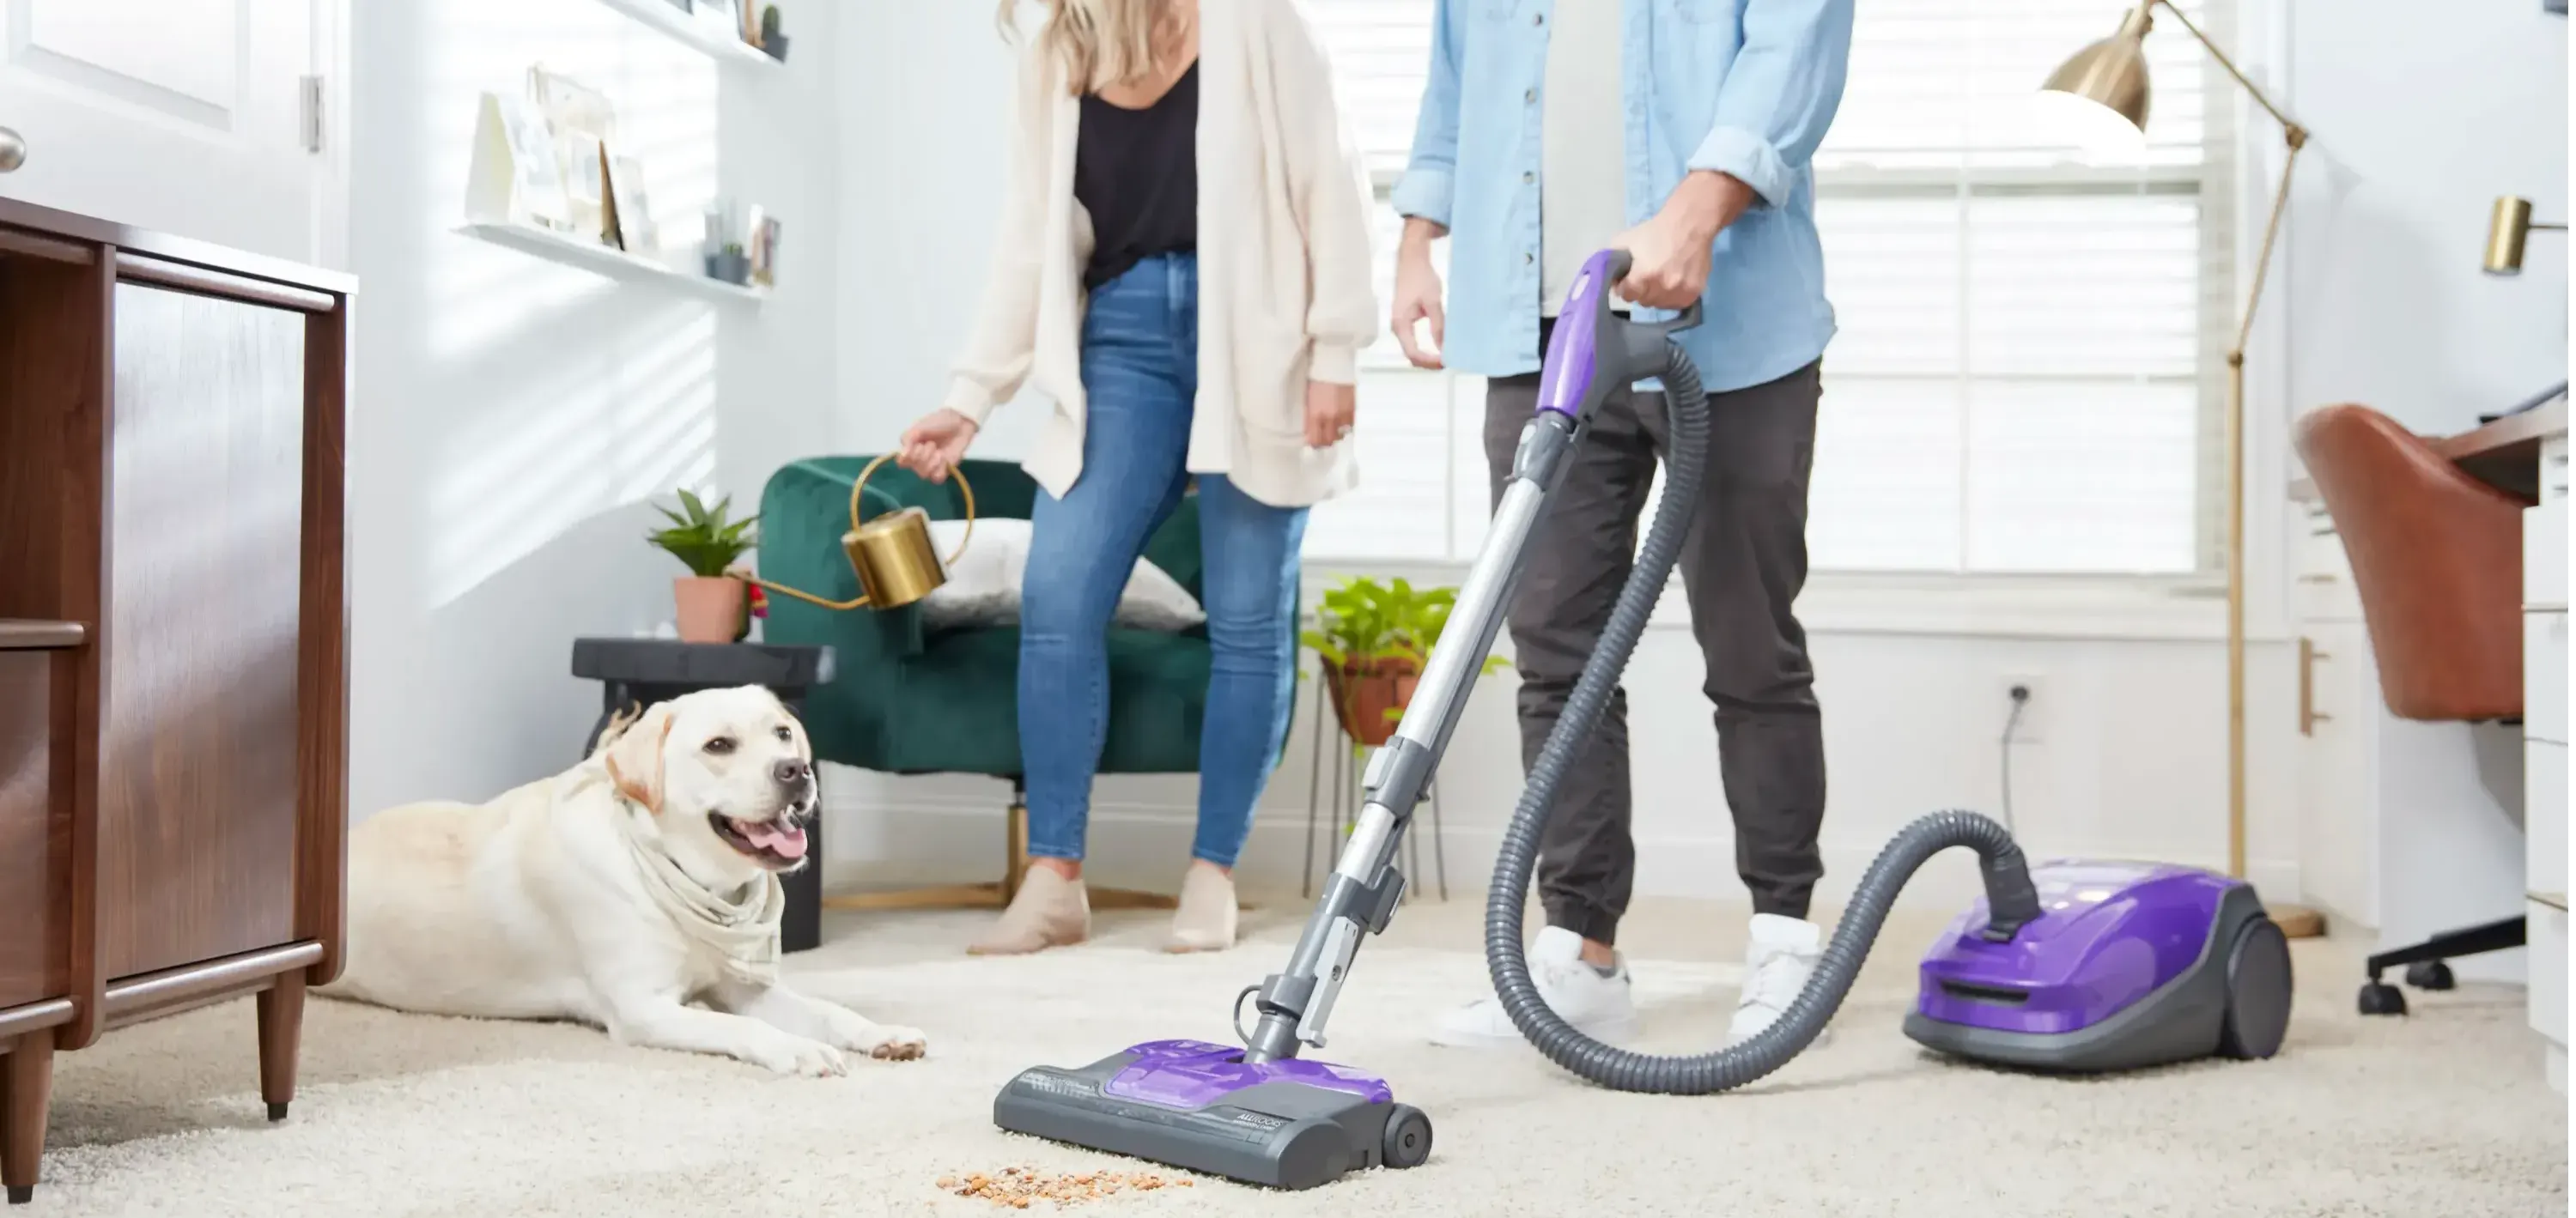 Slider image of a pet-friendly vacuum cleaning a common household mess